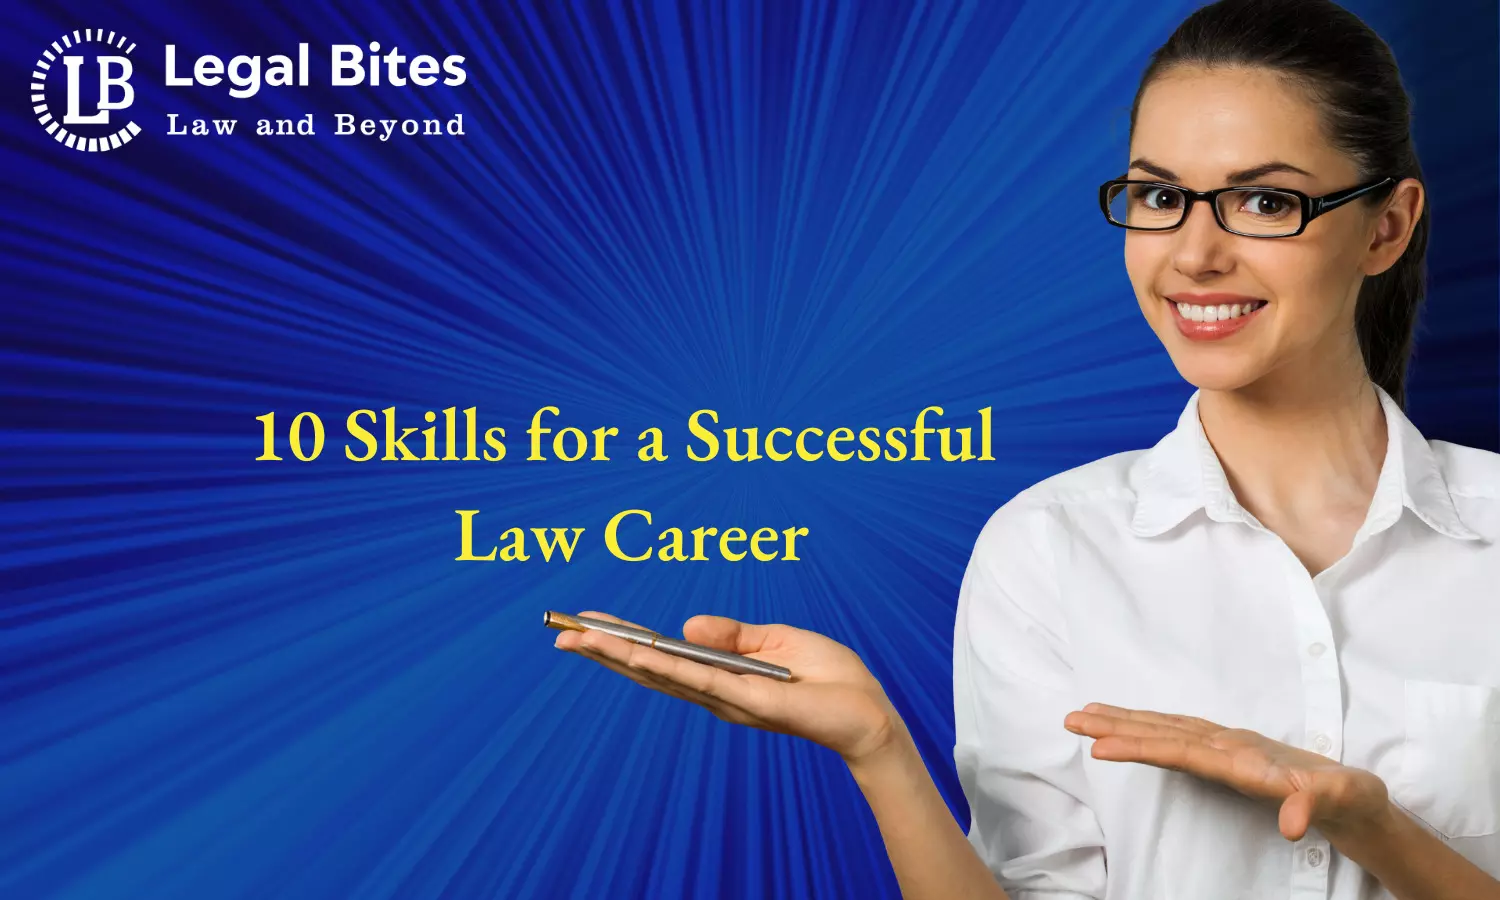 10 Skills for a Successful Law Career